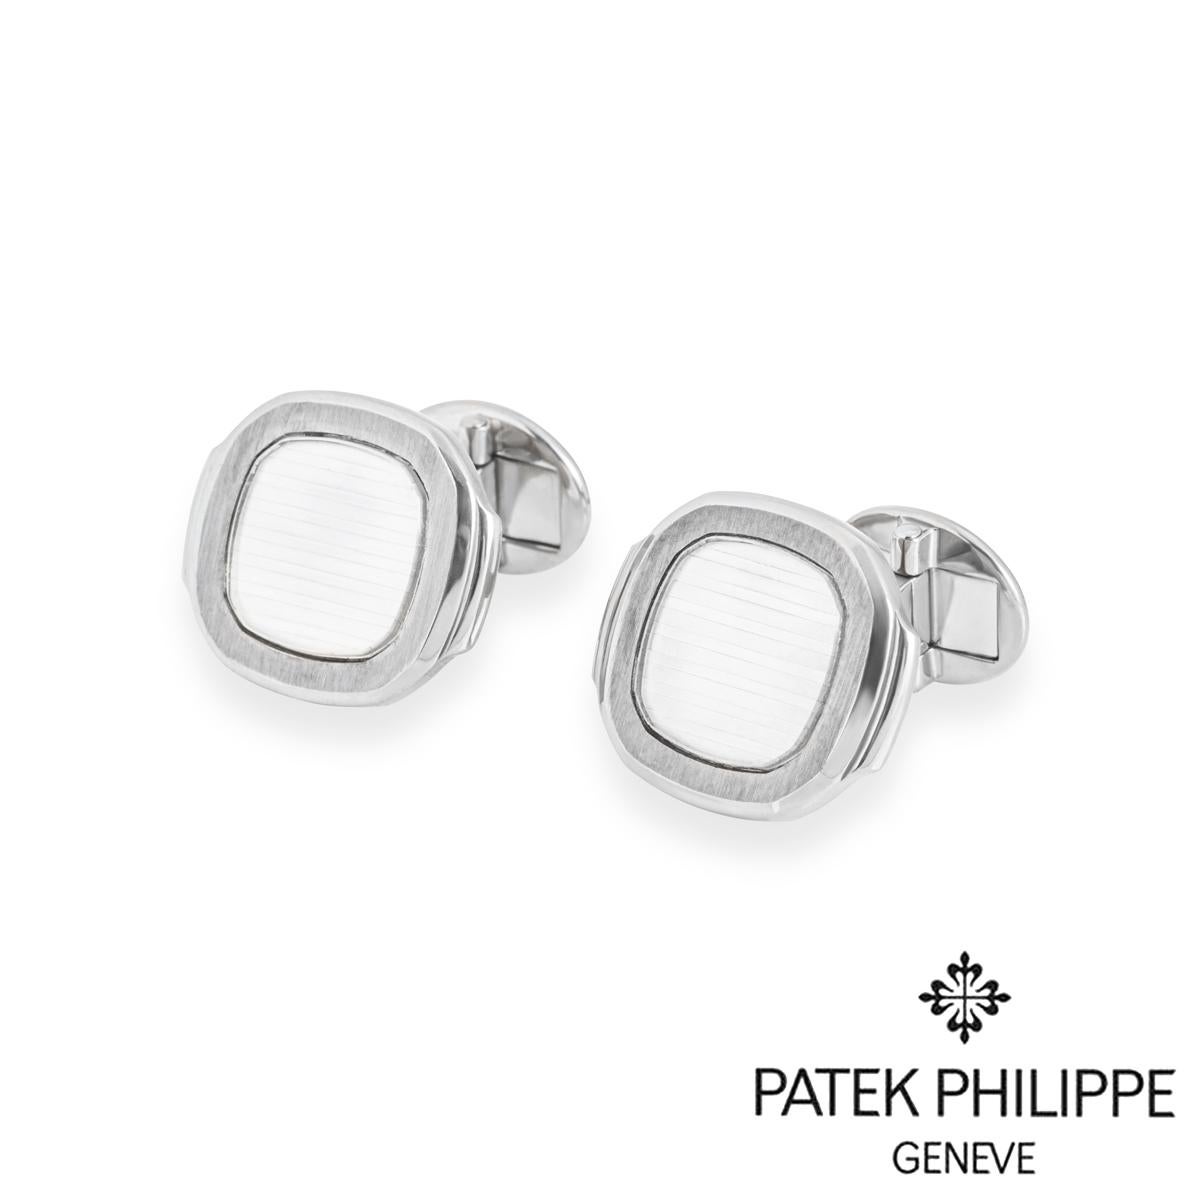 A stylish pair of 18k white gold cufflinks by Patek Philippe from the Nautilus collection. The cufflinks are set with a silvery-white Nautilus panel surrounded by a satin finish border. The cufflinks measure 2.2 cm in length, 1.9 cm in width and